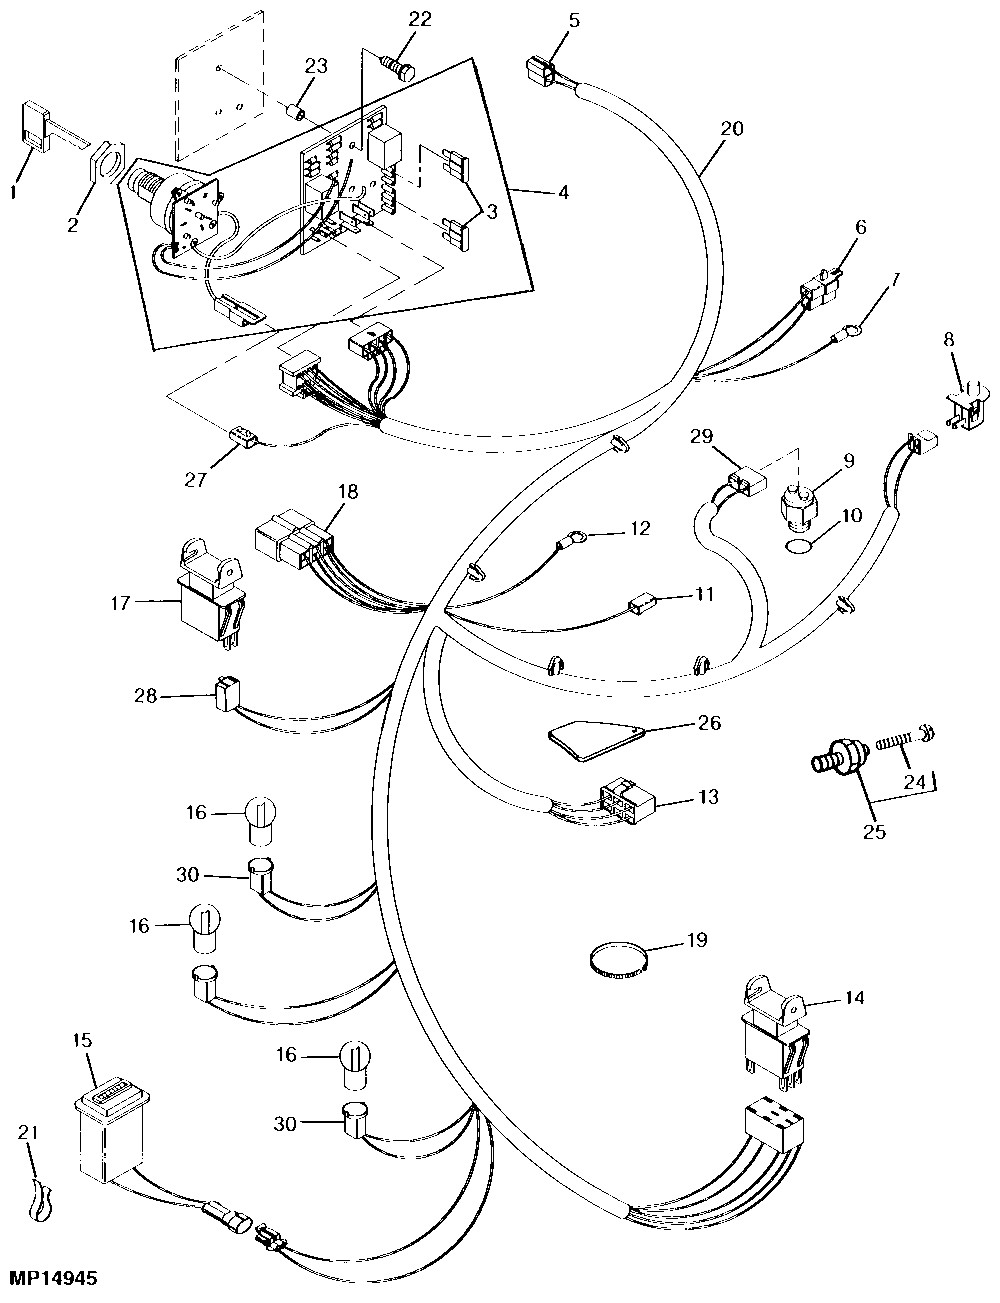 Wiring Diagram for A Water Cooled Gx345 John Deer Lawn Mower 29 John Deere 345 Wiring Diagram Free Wiring Diagram source Of Wiring Diagram for A Water Cooled Gx345 John Deer Lawn Mower